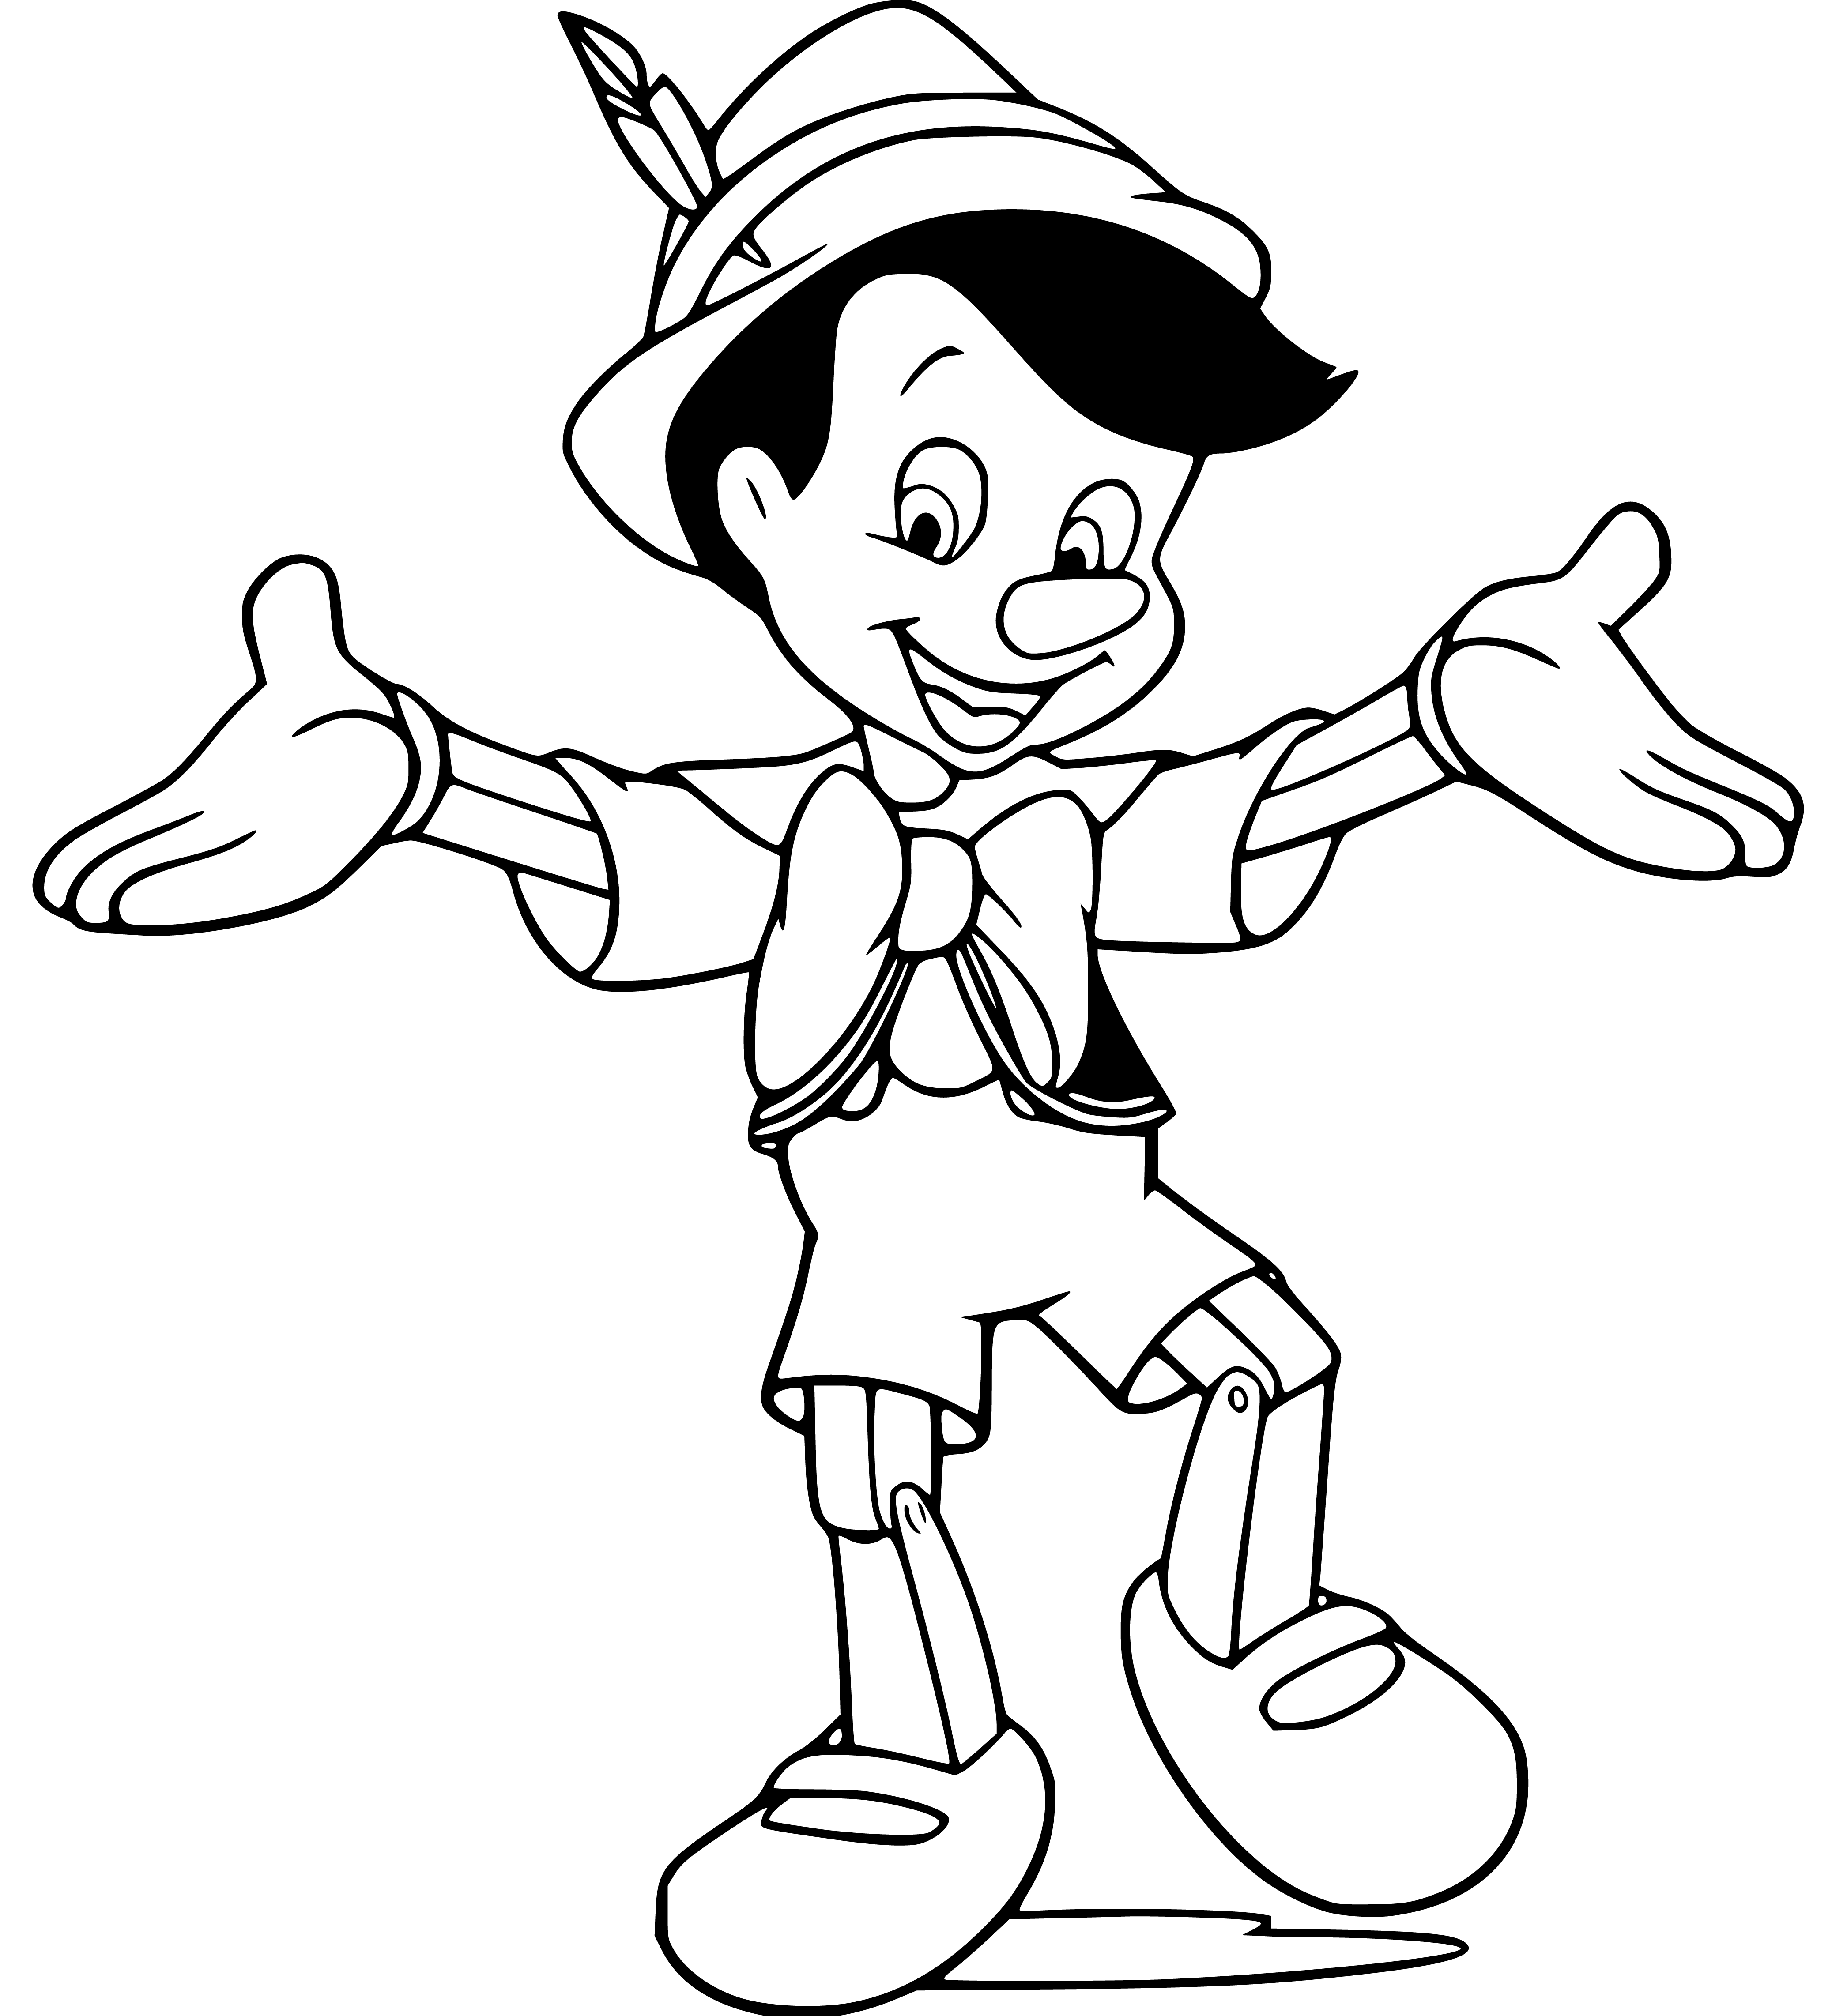 Pinocchio in Puddle Coloring Sheet - SheetalColor.com